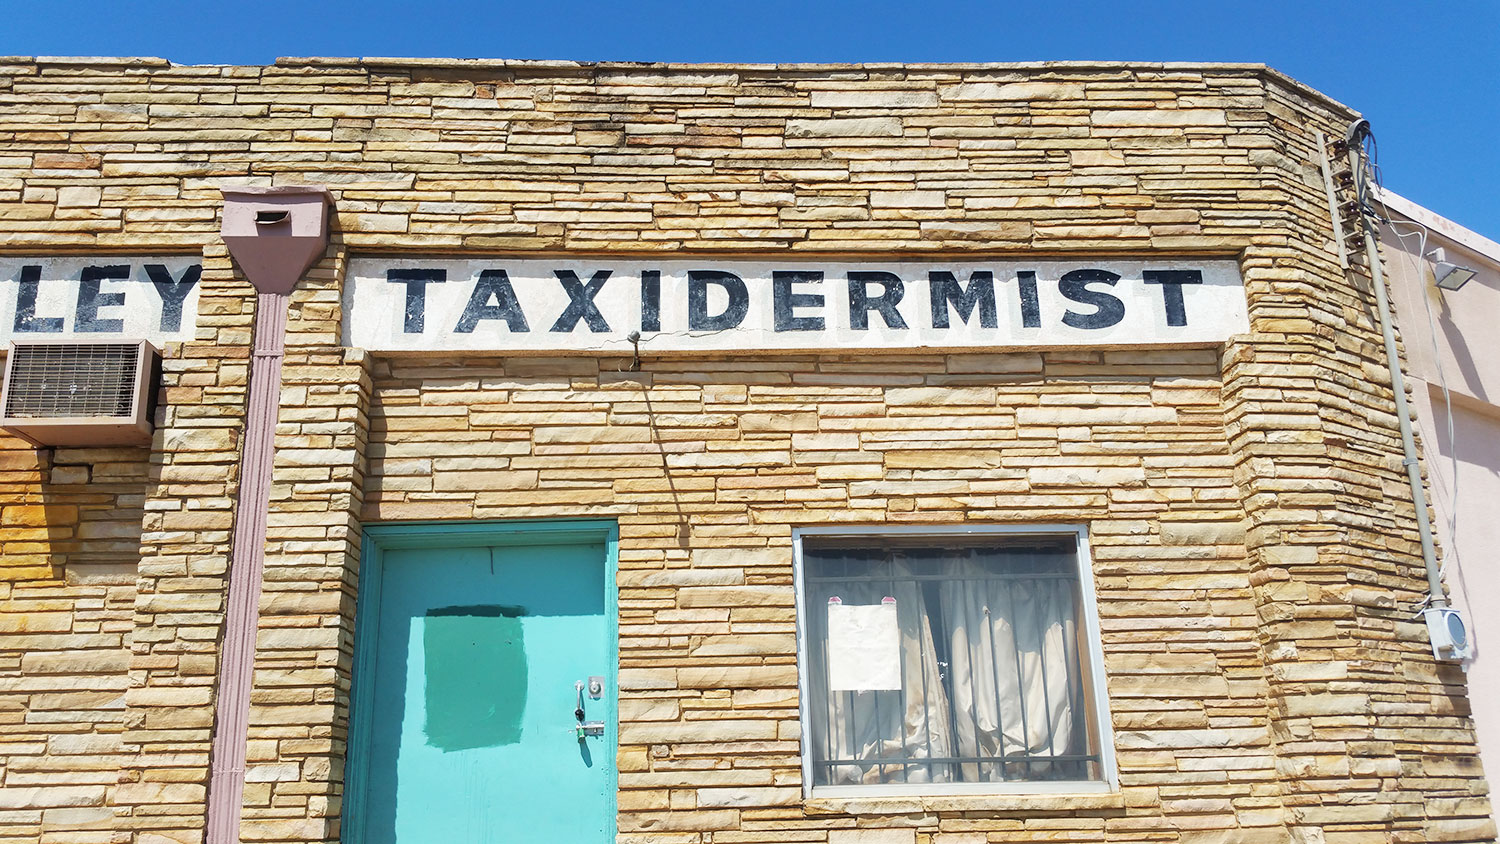 The taxidermist by the Fort Worth Gay Bar